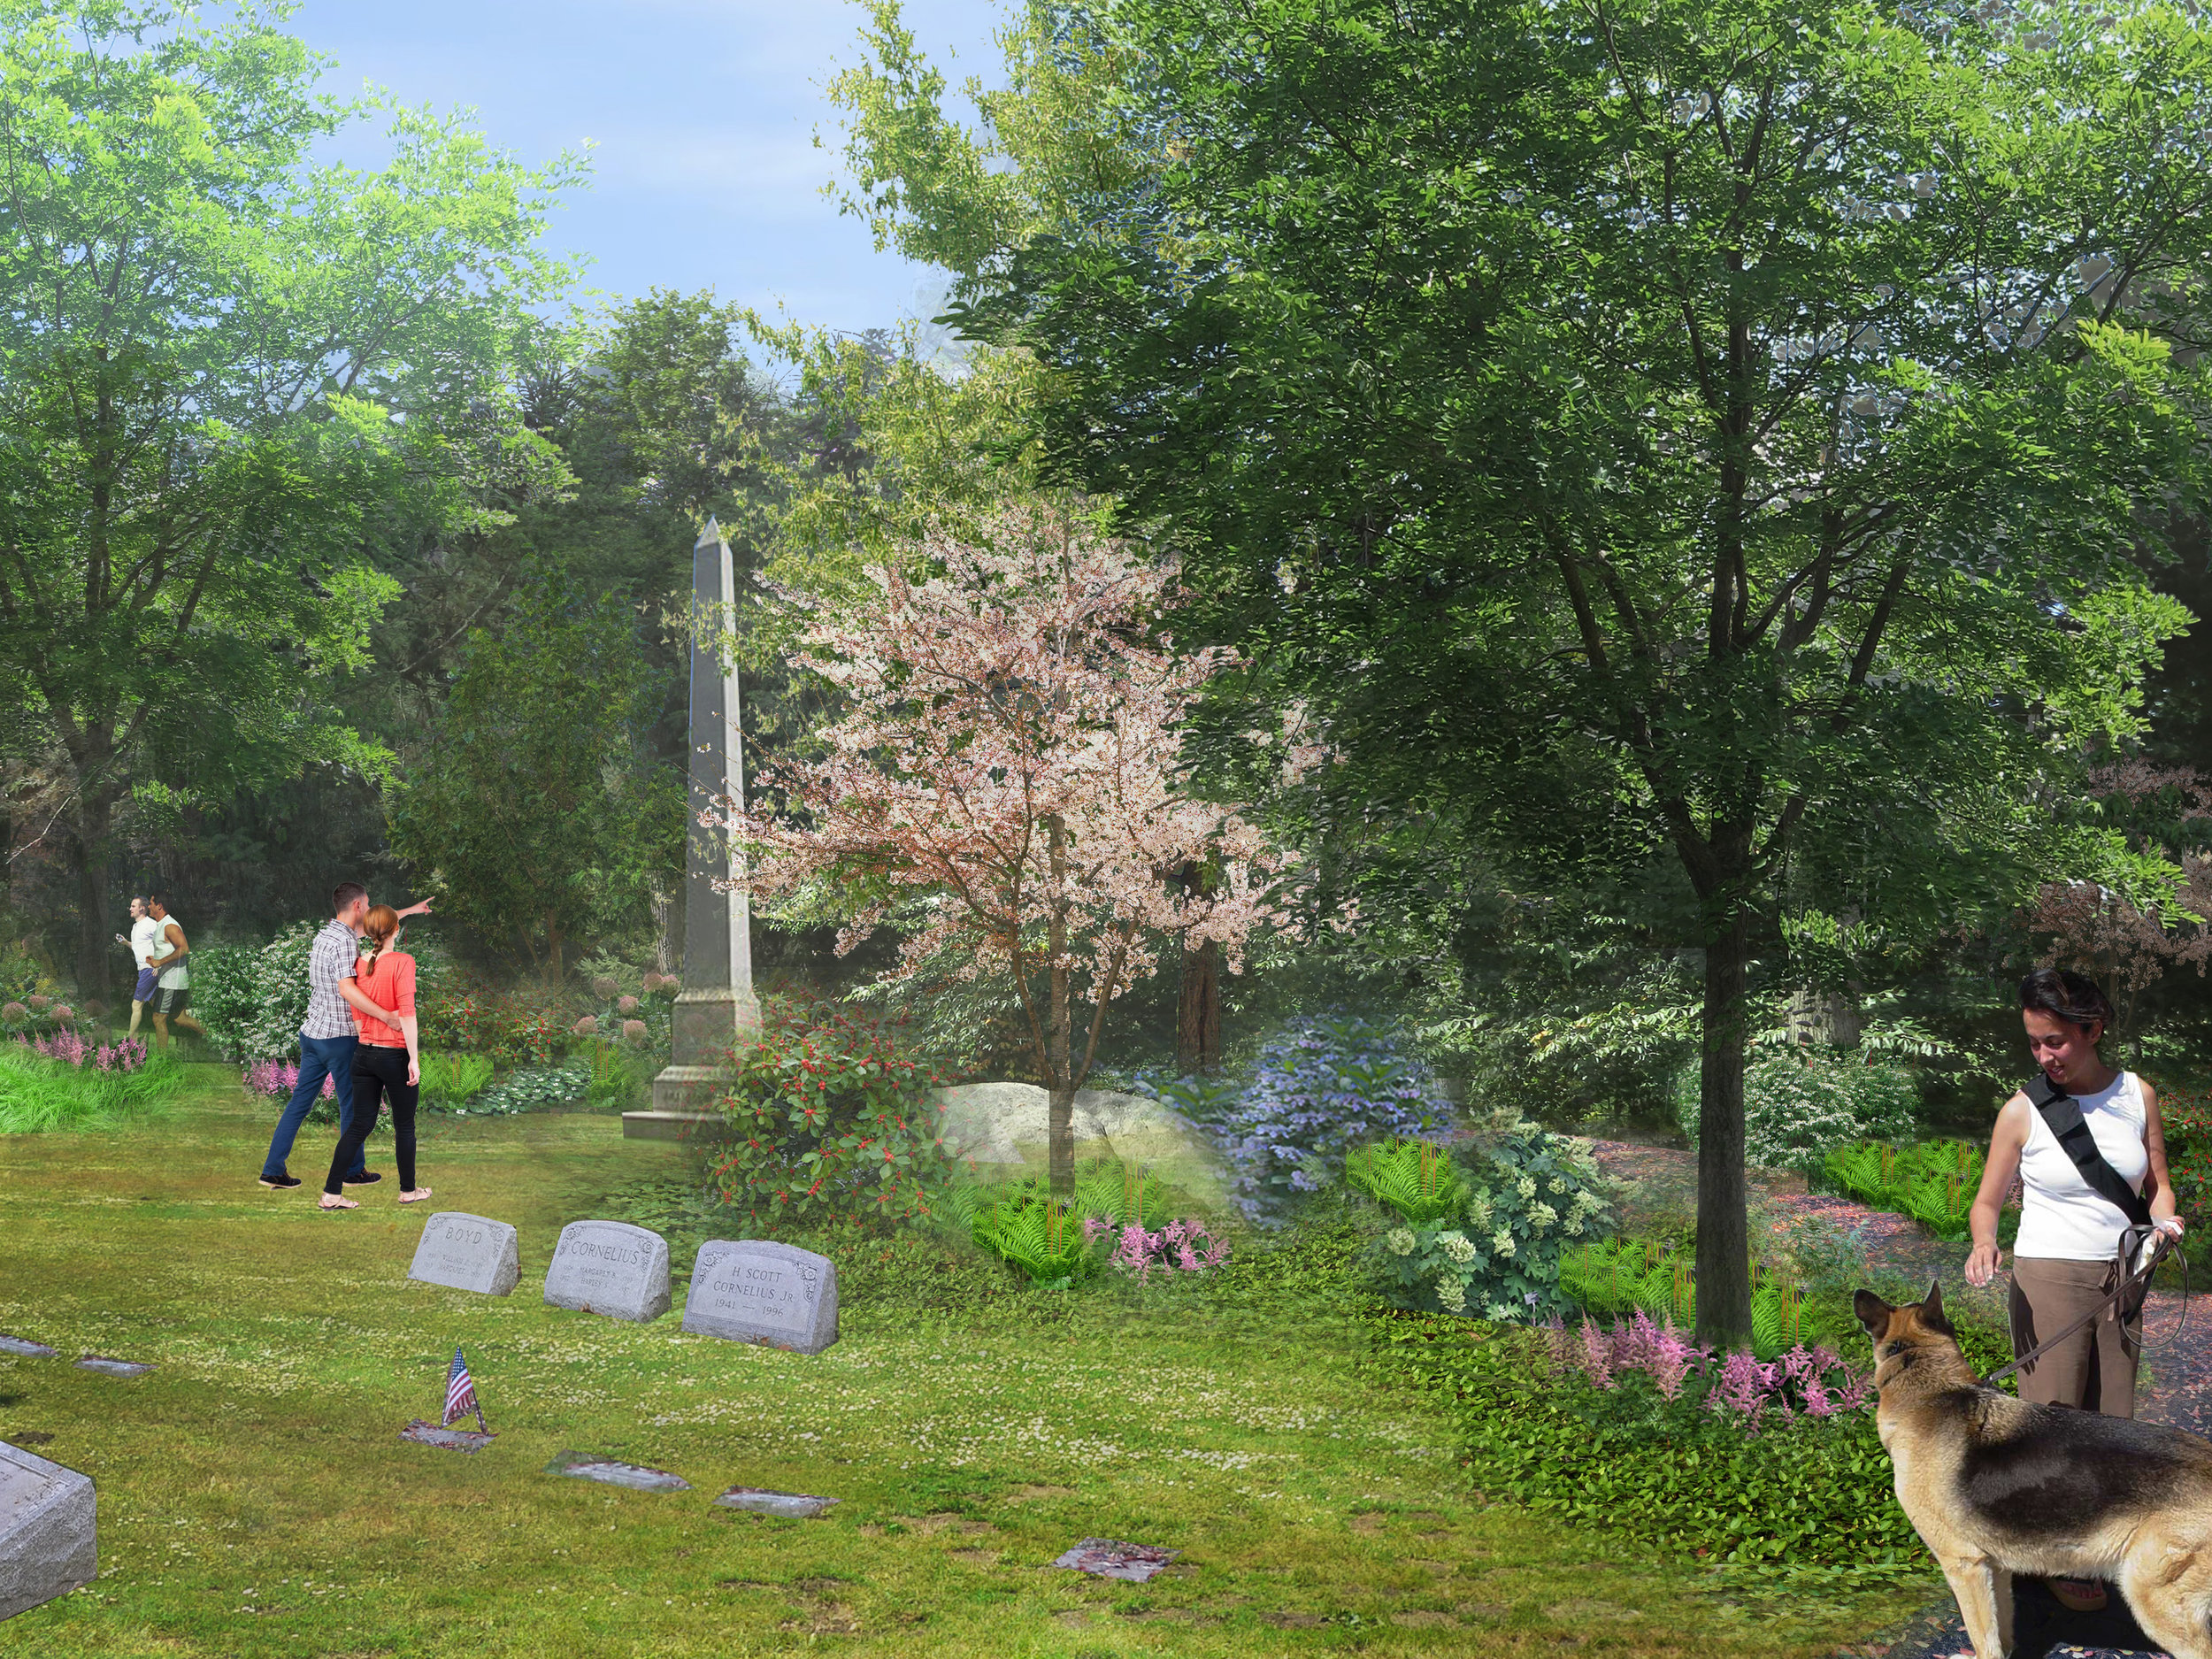  Rendering of Telford Path at West Laurel Hill Cemetery, Bala Cynwyd, PA (Rendering by Halvorson Design) 